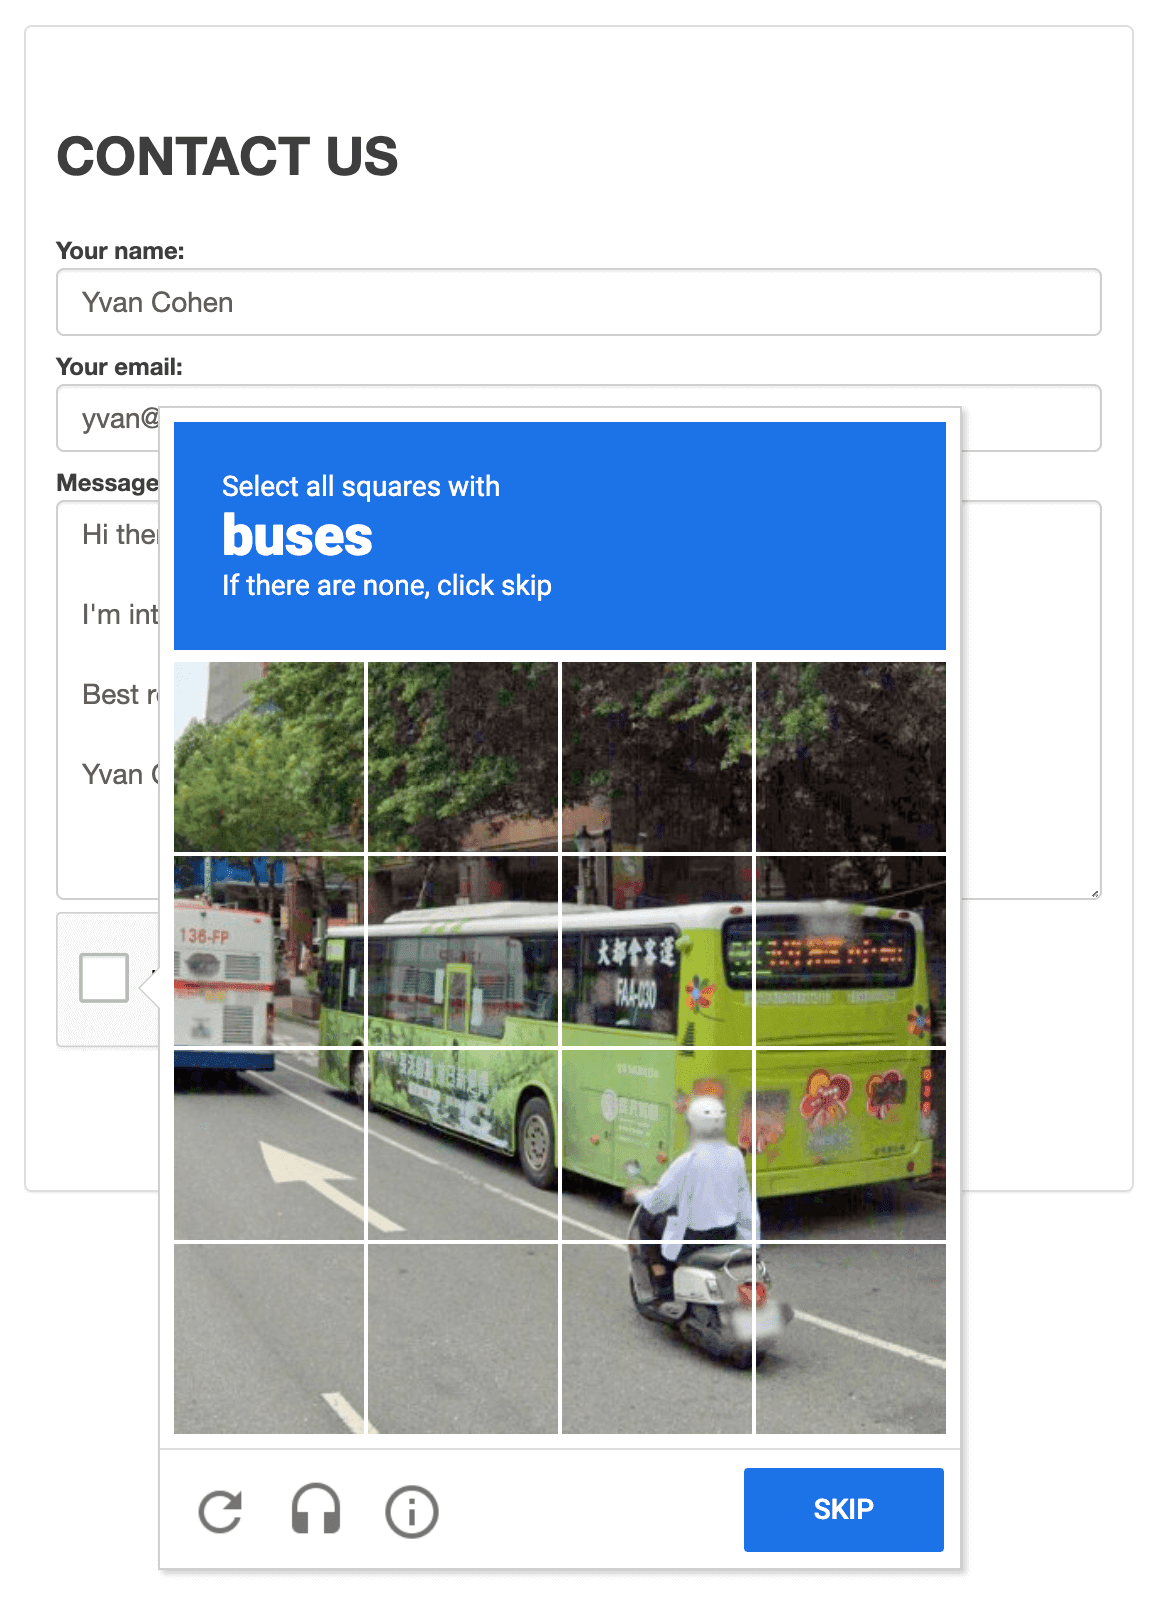 Use Google ReCaptcha to prevent robots submitting forms.